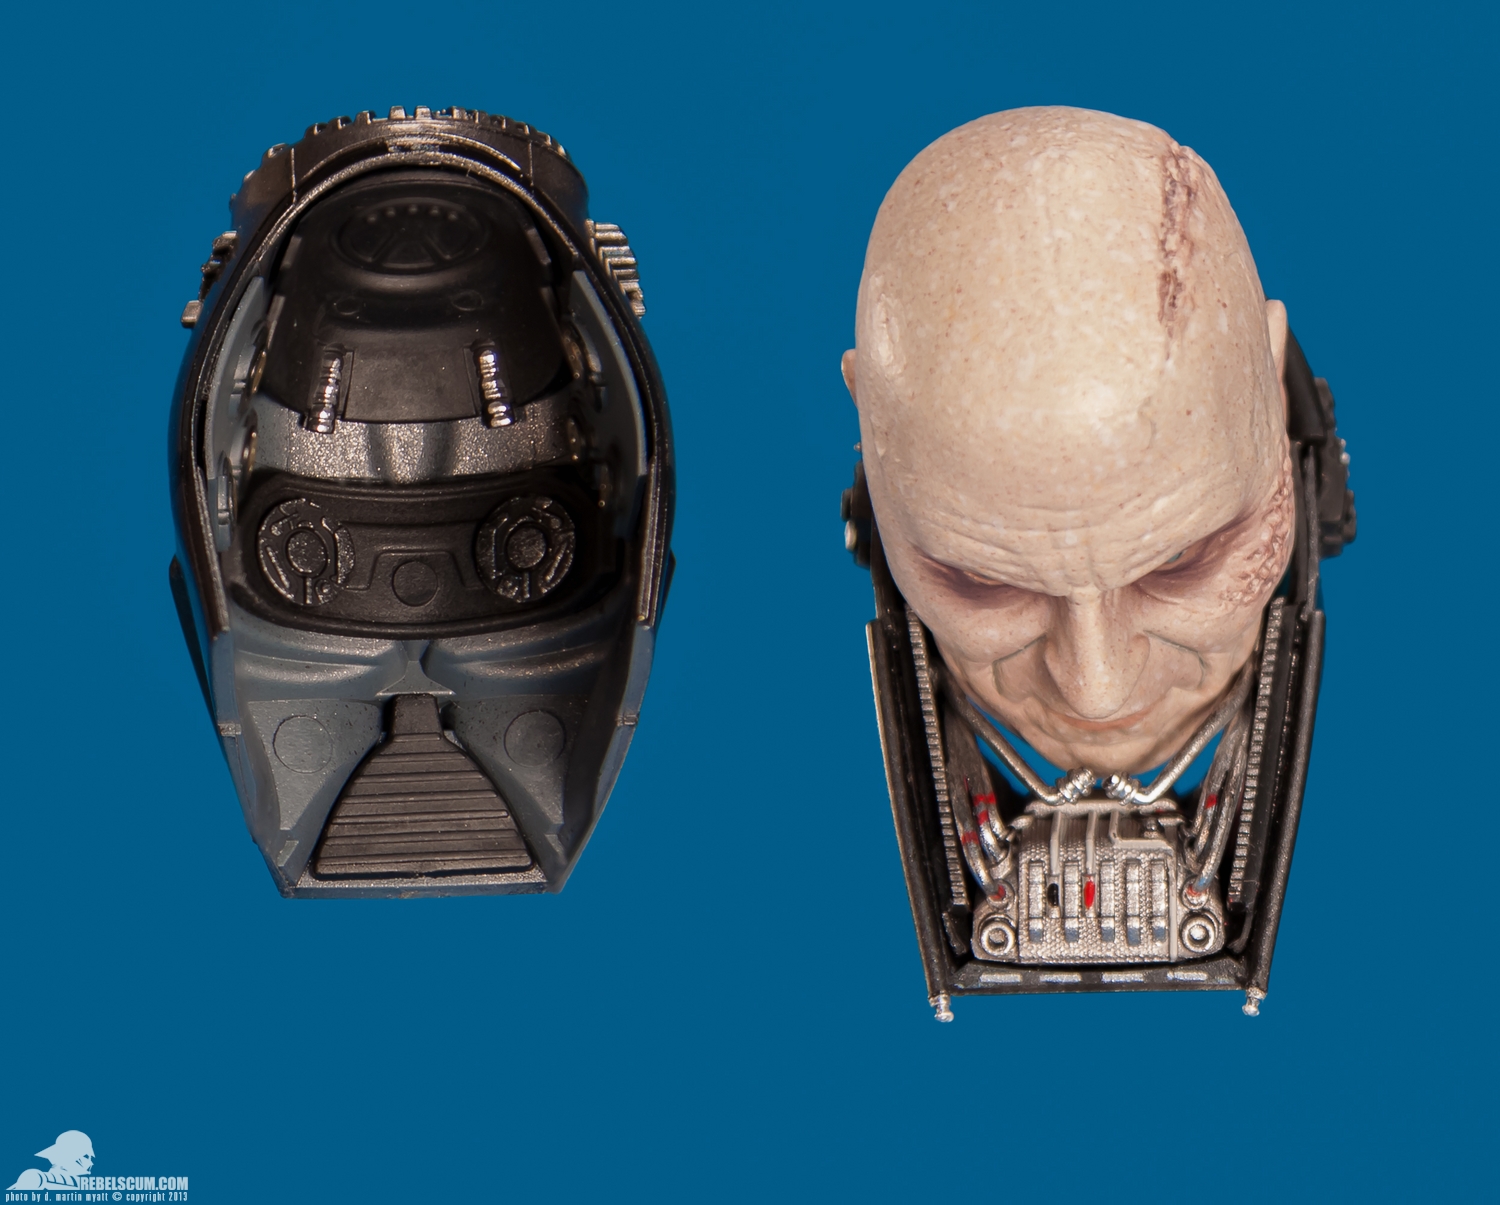 Darth-Vader-Return-Of-The-Jedi-Sixth-Scale-Sideshow-Collectibles-031.jpg